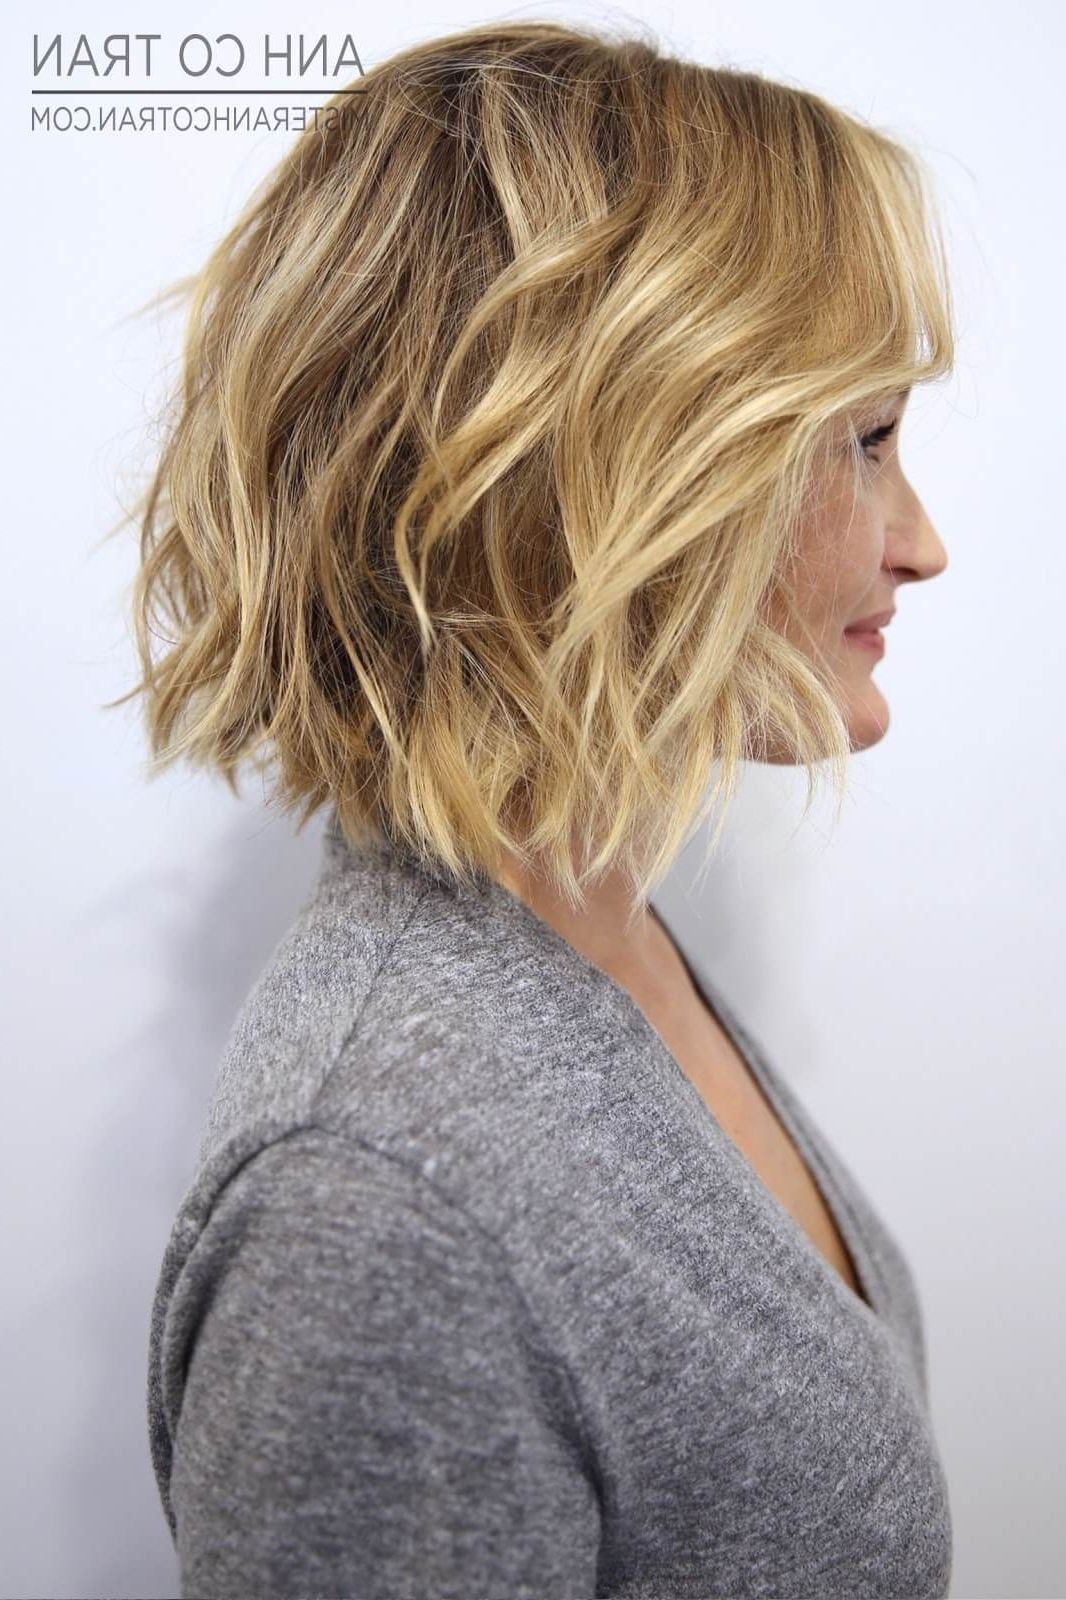 Fashionable Tousled Shoulder Length Waves Blonde Hairstyles Throughout 50 Ways To Wear Short Hair With Bangs For A Fresh New Look (View 9 of 20)